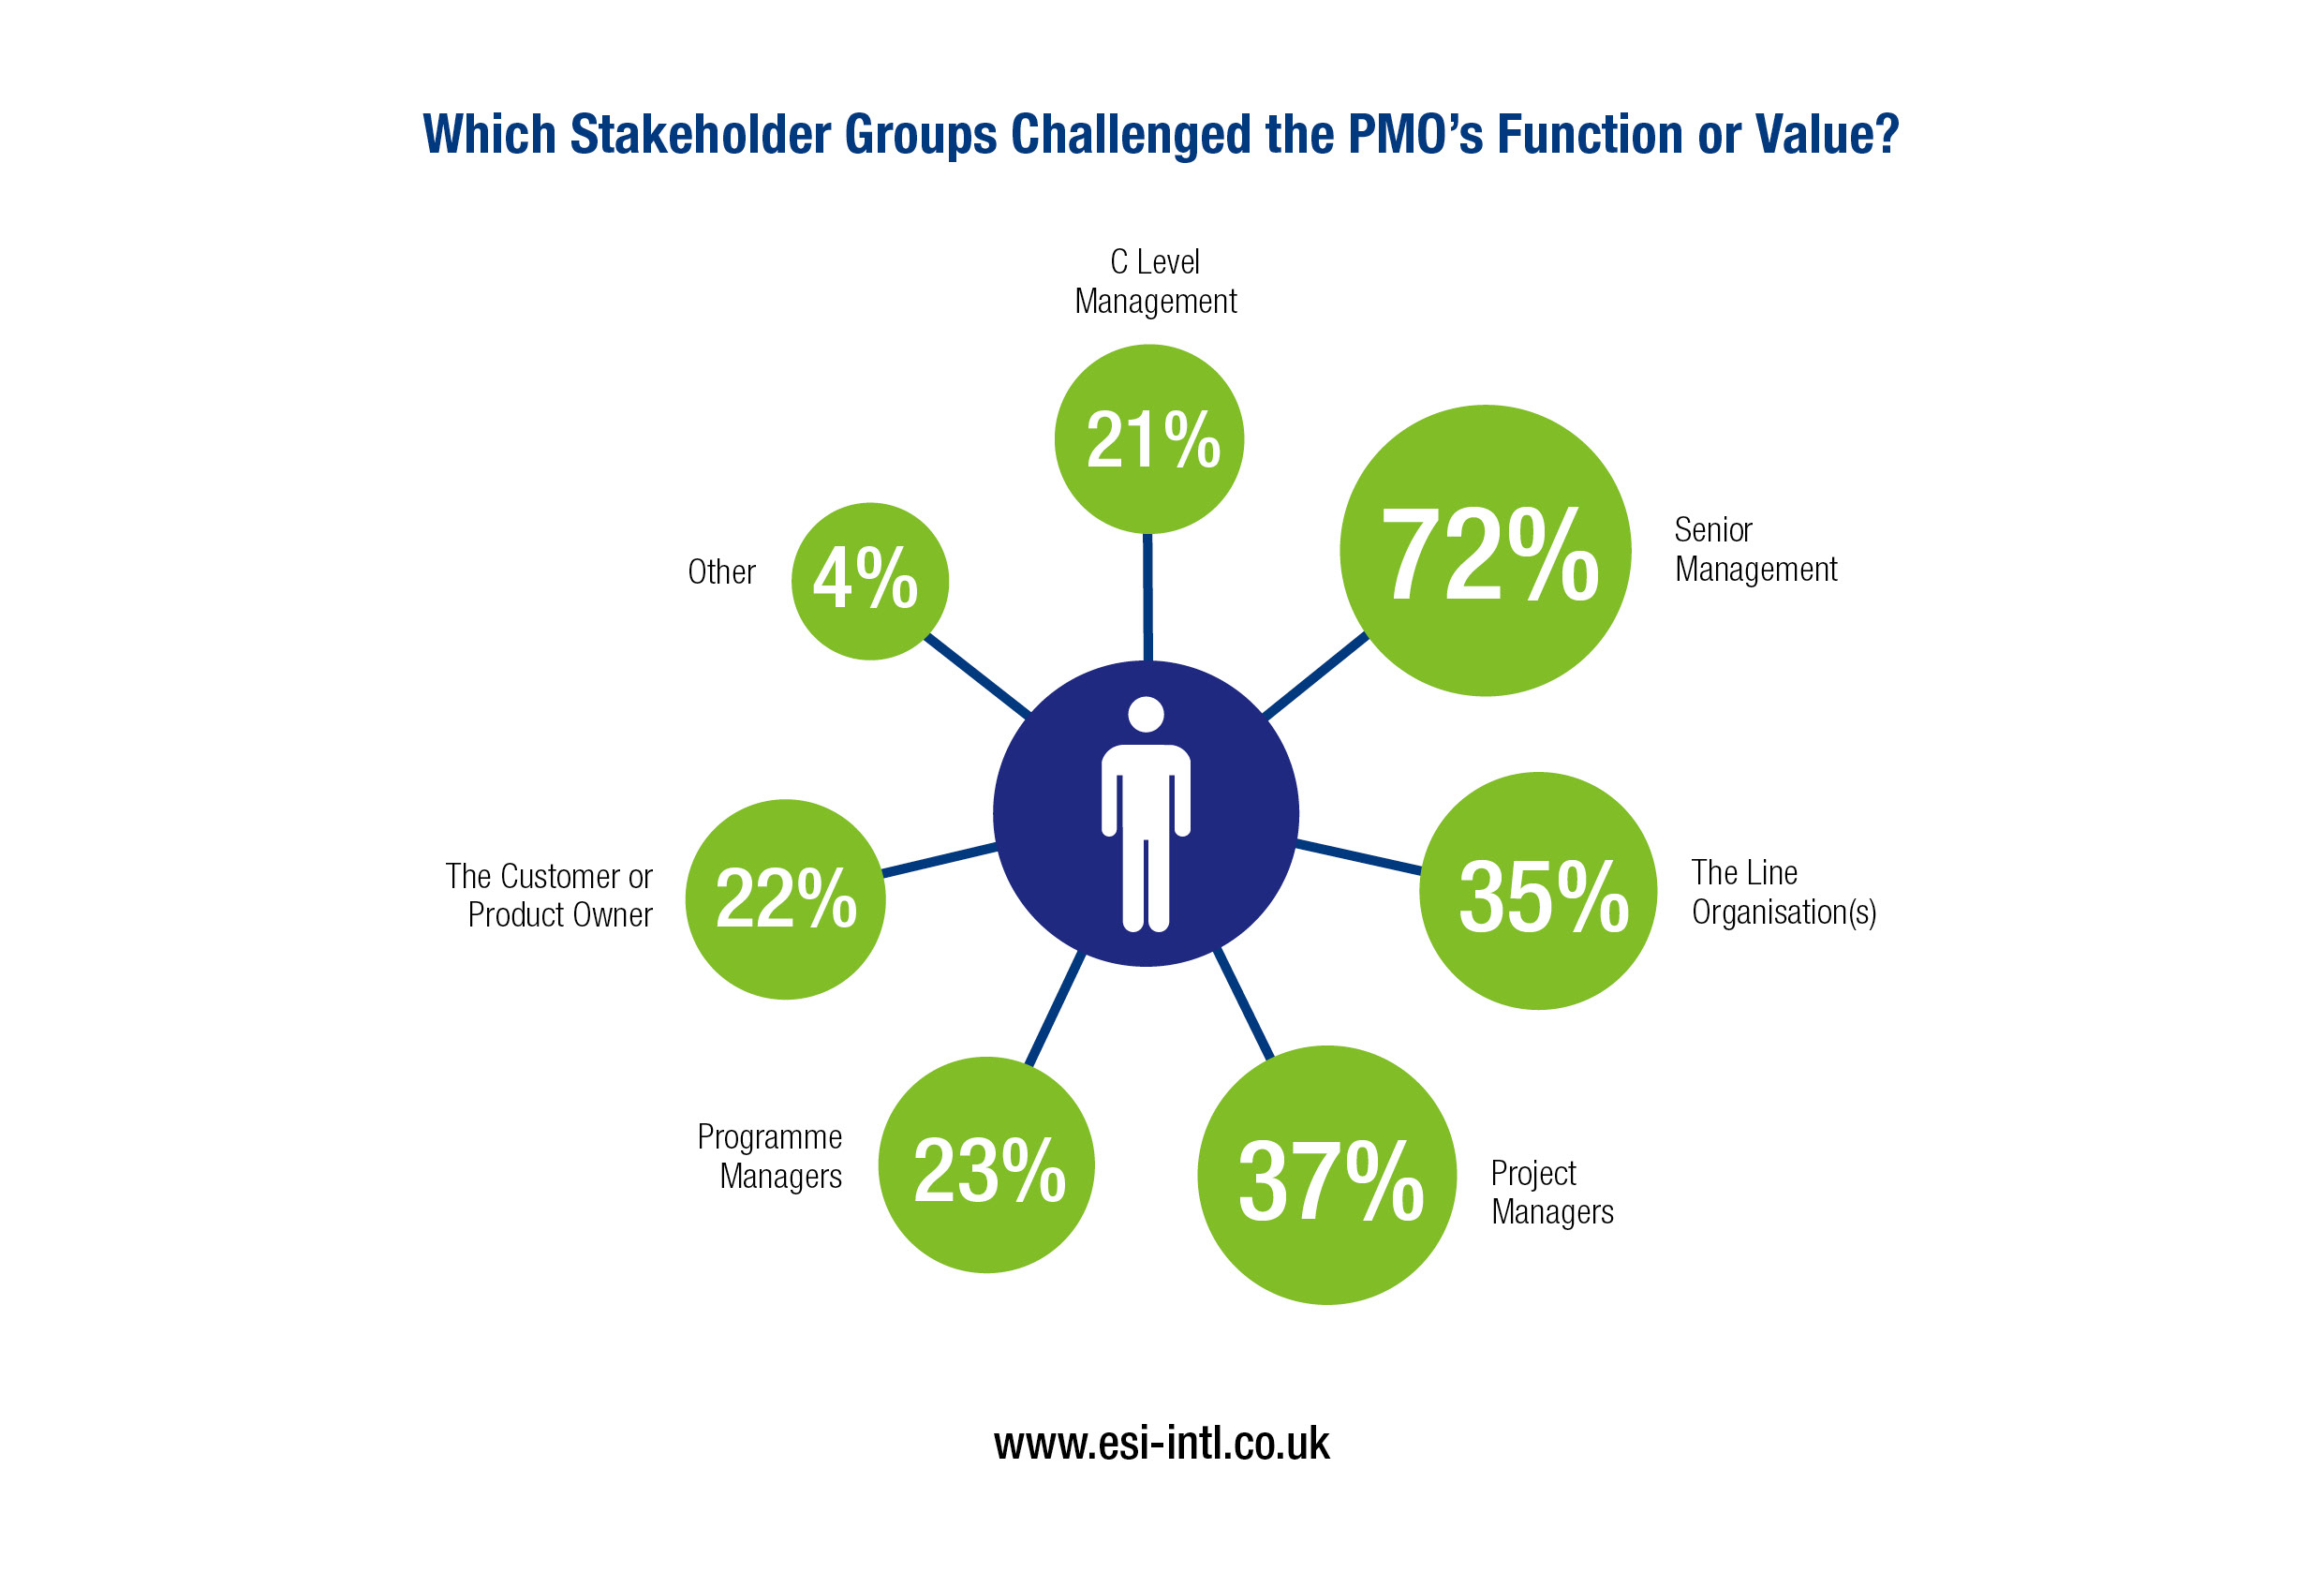 Stakeholder Groups Challenging the PMO's Value or Function